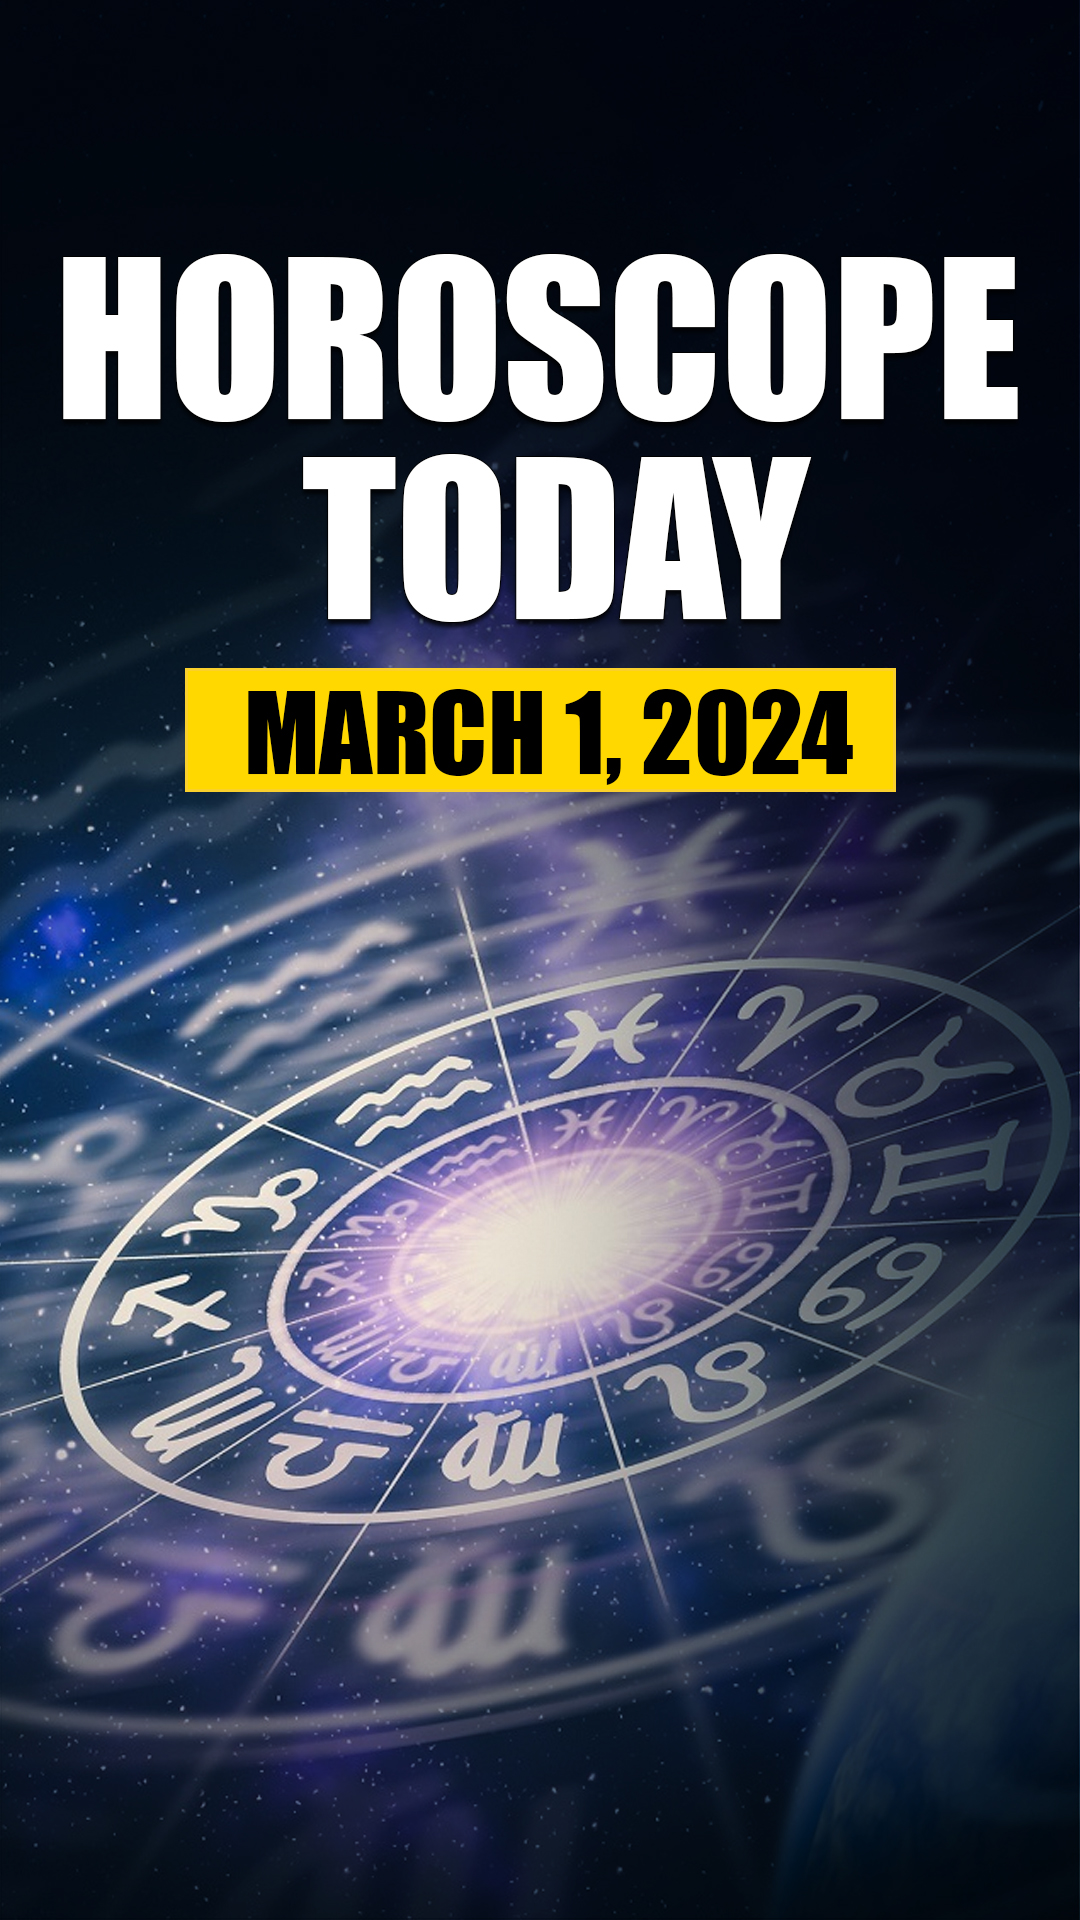 Prosperity in business for Leos; know about other zodiac signs in March 1, 2024 horoscope